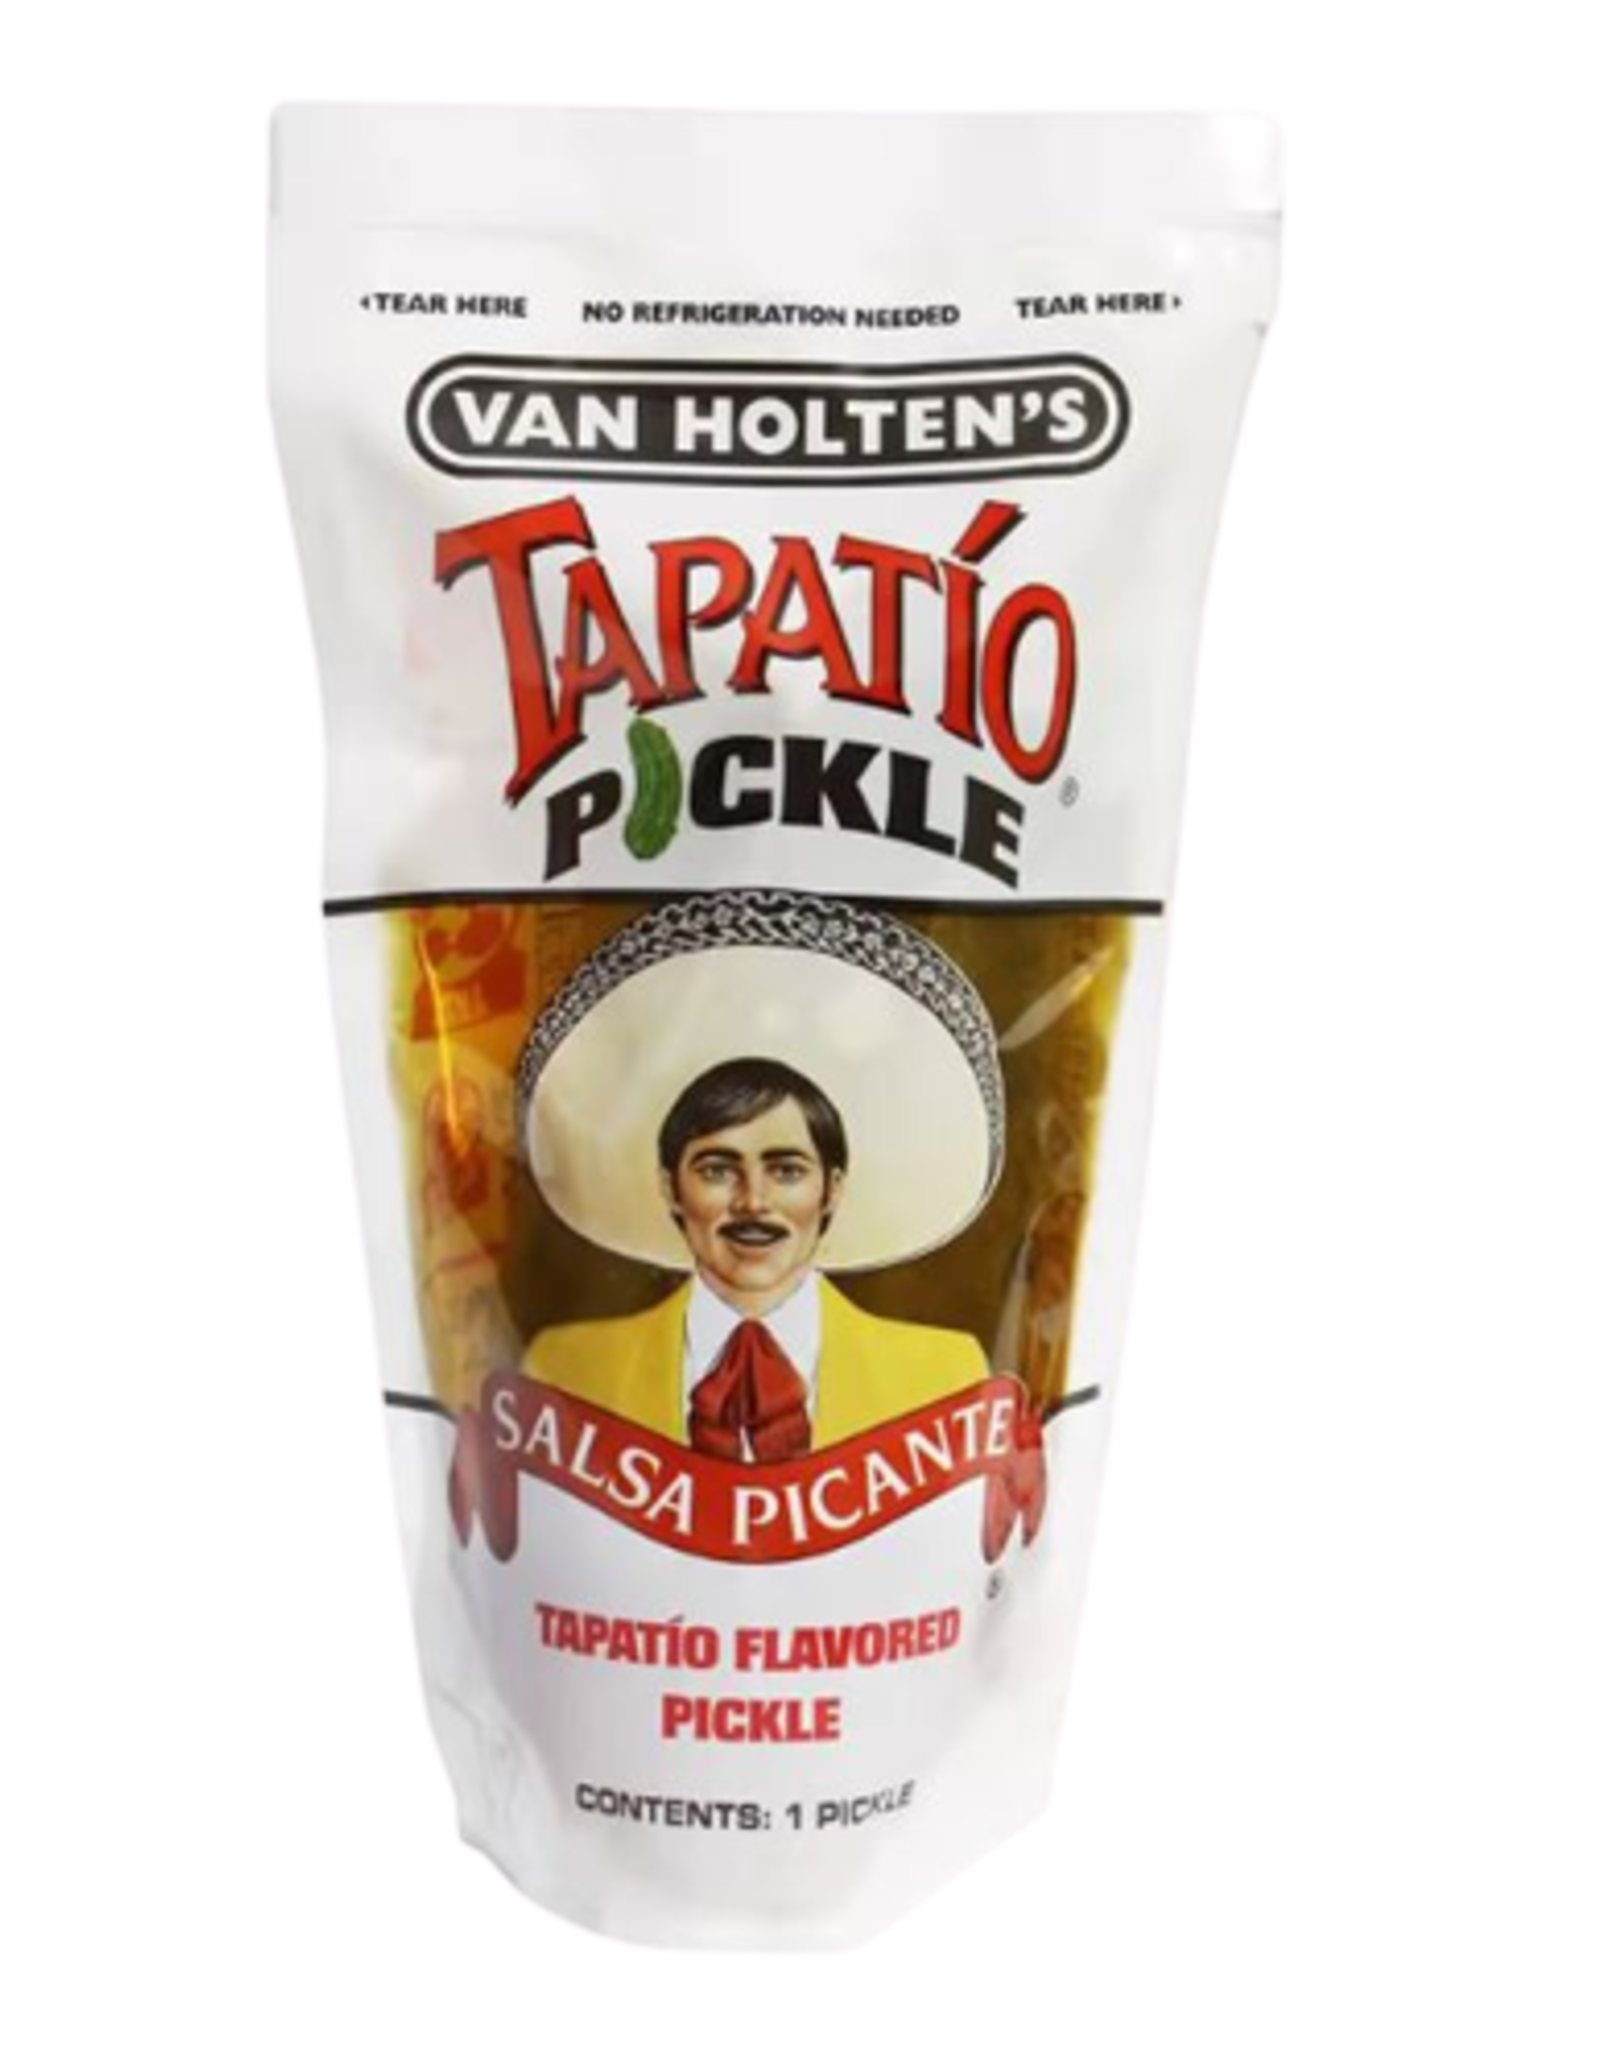 VAN HOLTEN - KING SIZE PICKLE-IN-A-POUCH - TAPATIO